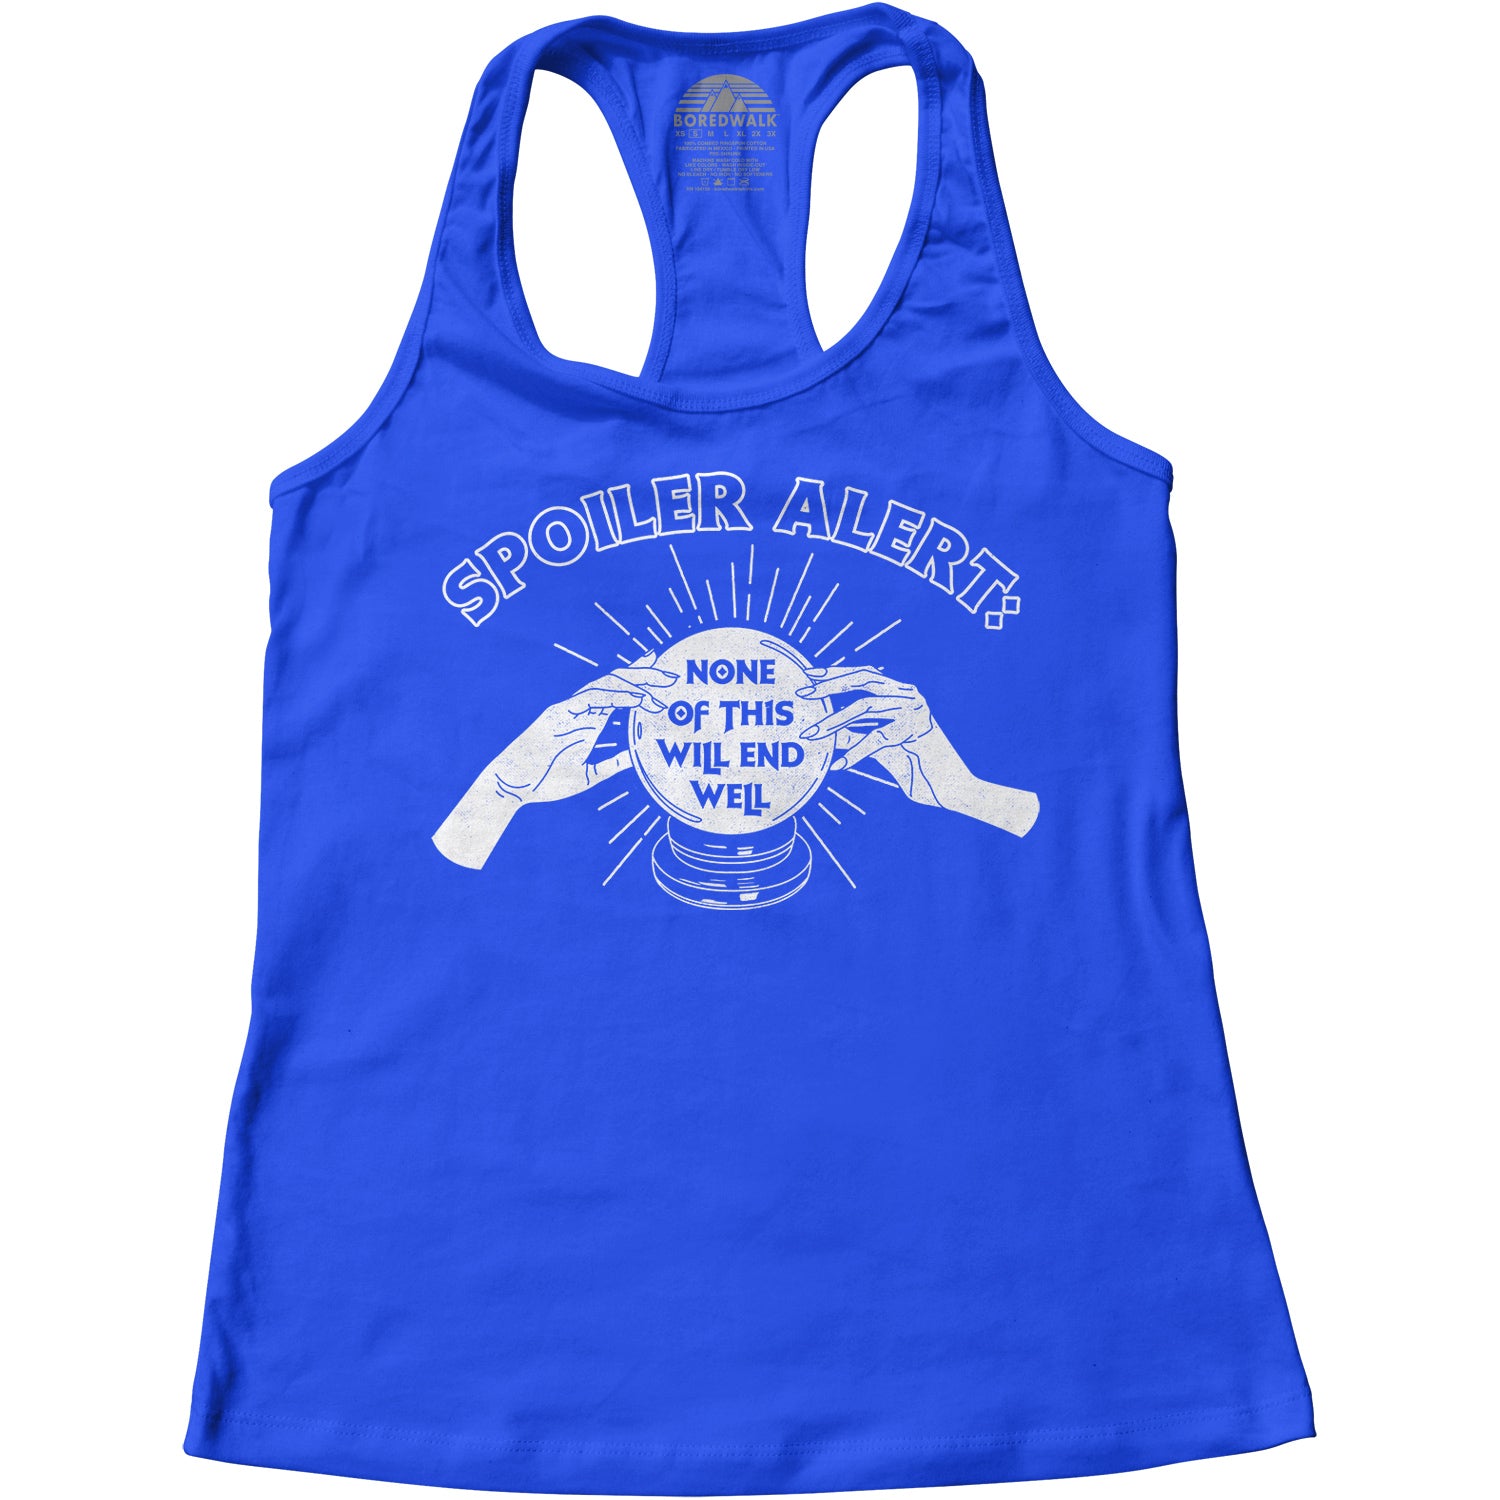 Women's Spoiler Alert None of This Will End Well Racerback Tank Top